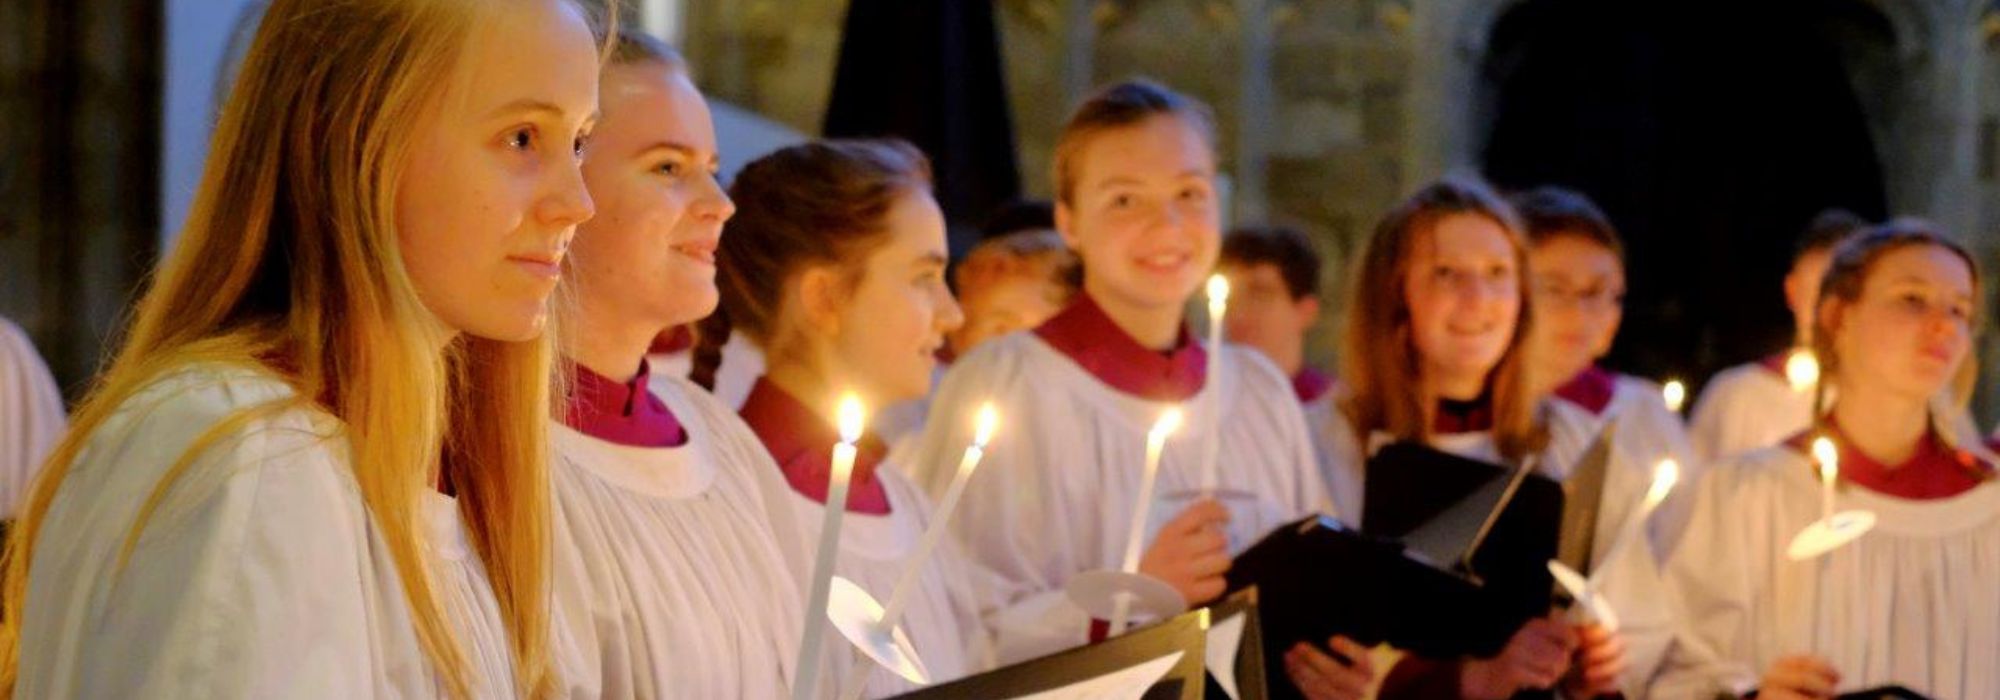 Choir of Merton College Sings with candles